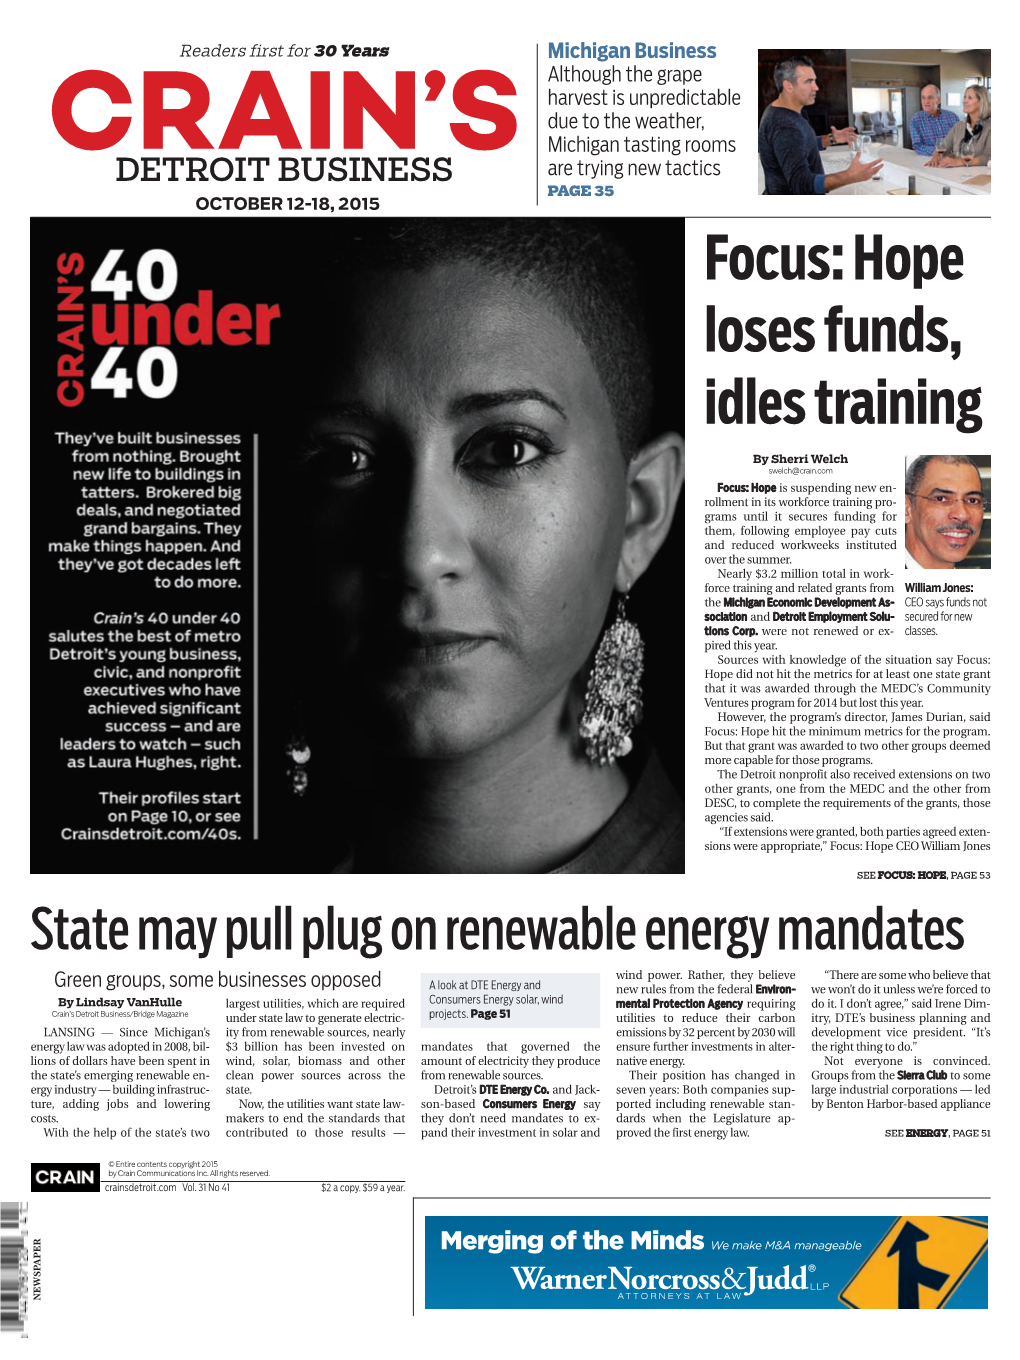 Focus: Hope Loses Funds, Idles Training